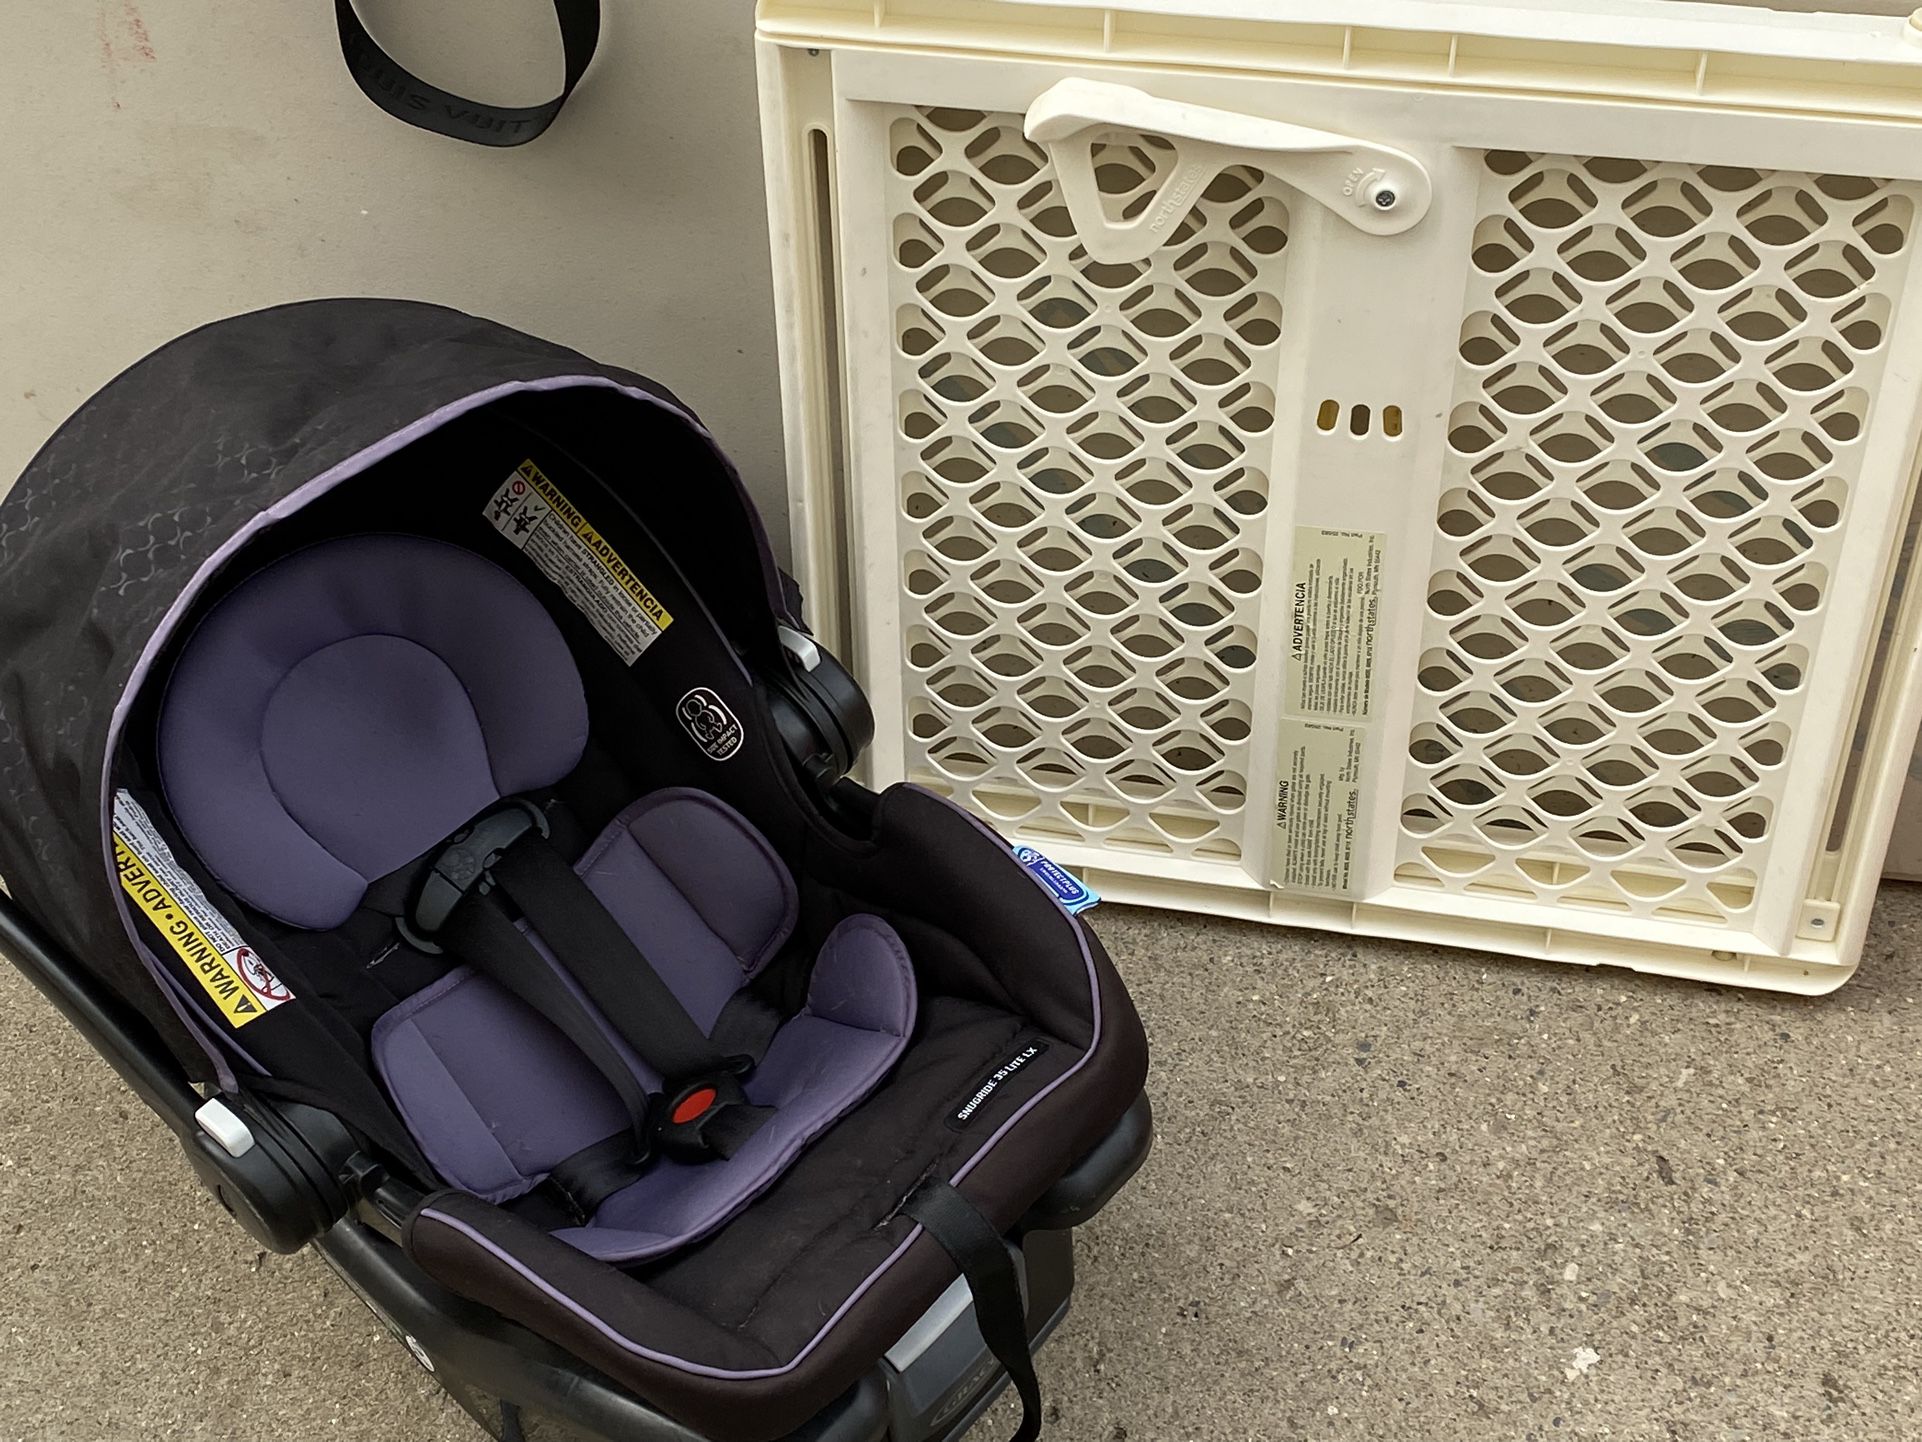 Like New Car Seat And Baby Gate 2 For 1 